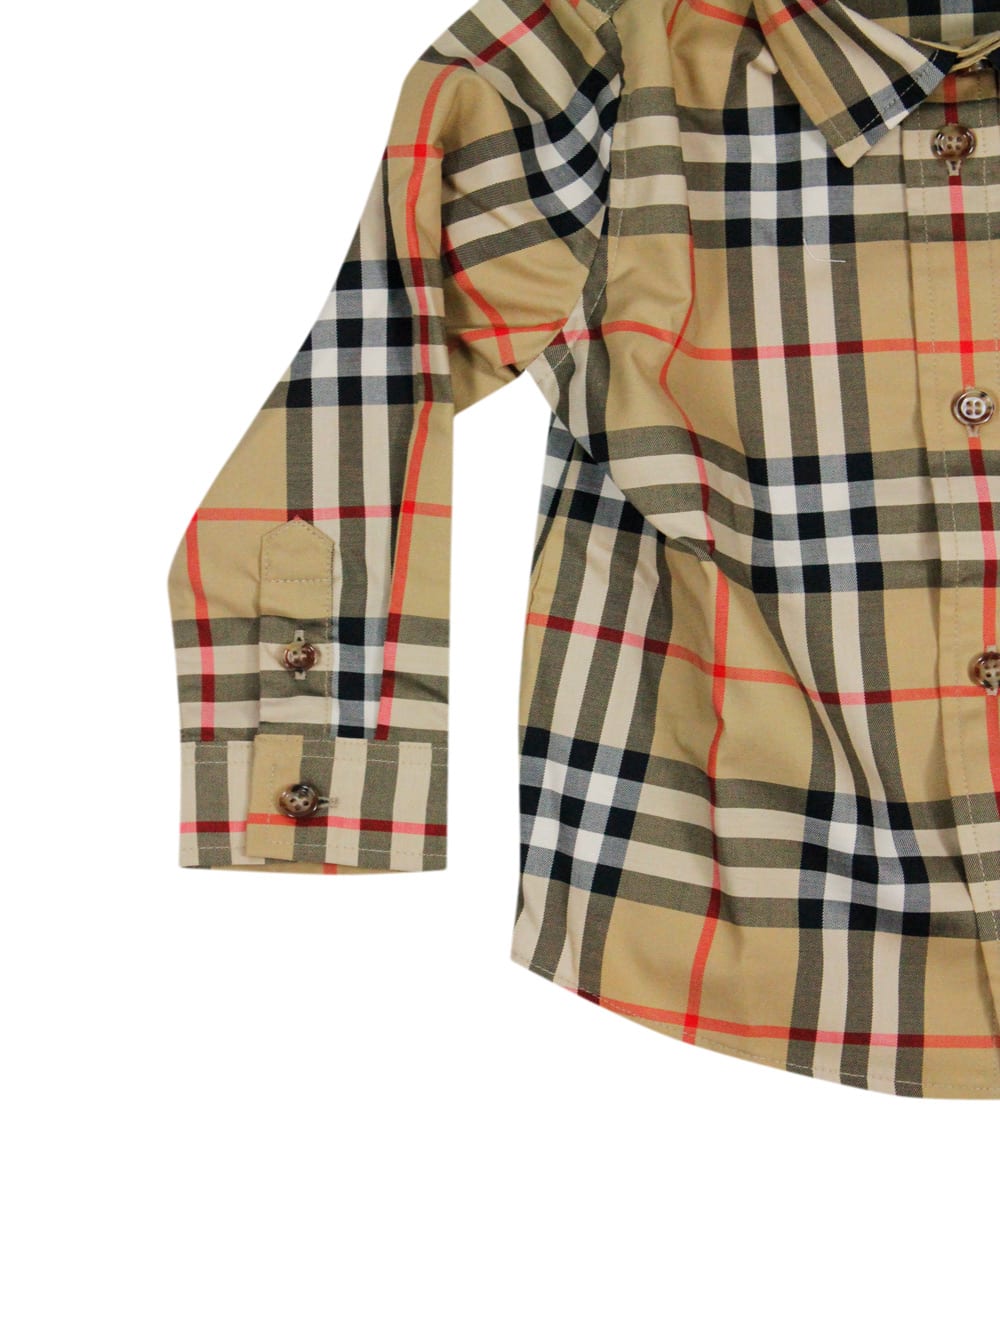 Shop Burberry Stretch Cotton Twill Shirt With Patch Pocket On The Chest In A Vintage Check Pattern In Beige